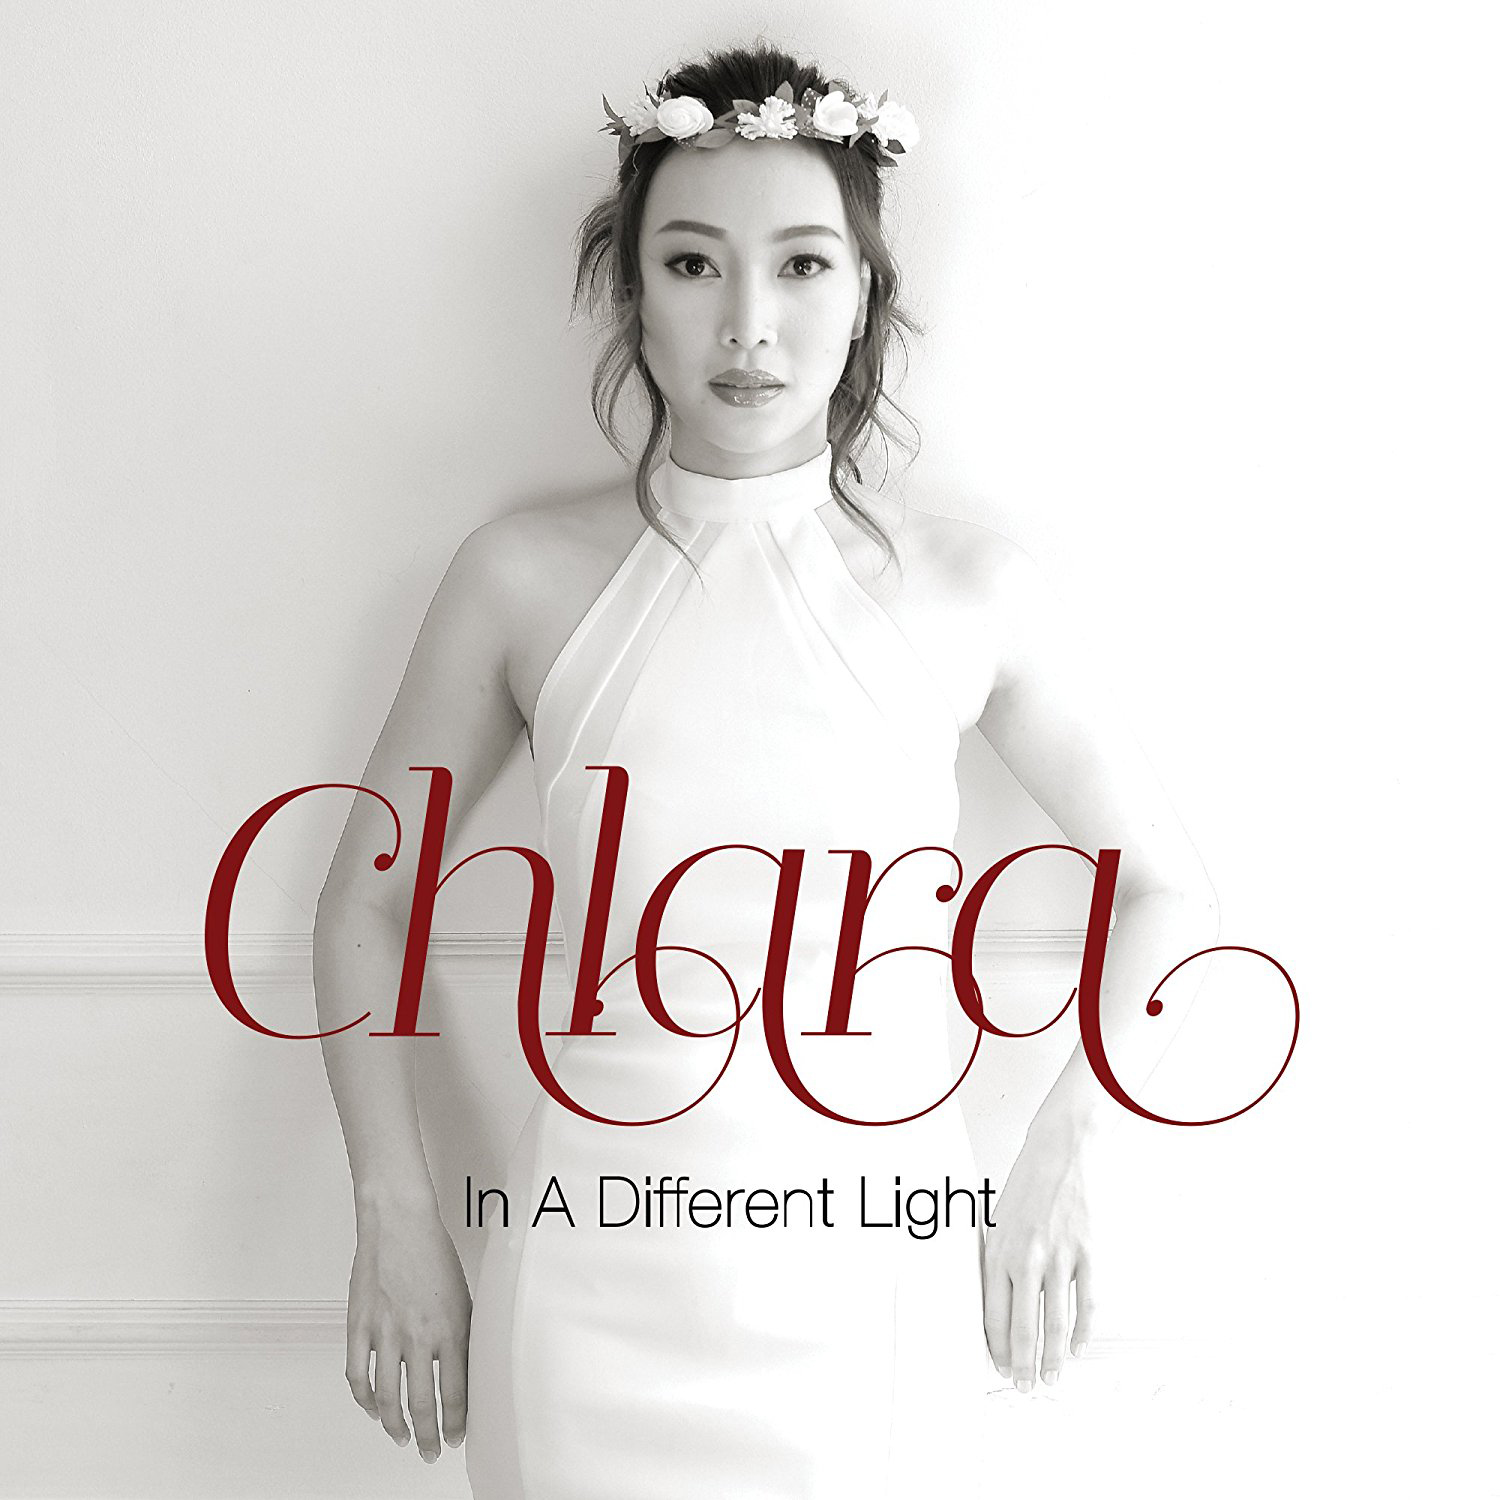 Chlara – In A Different Light (2016) SACD ISO + FLAC 24bit/96kHz